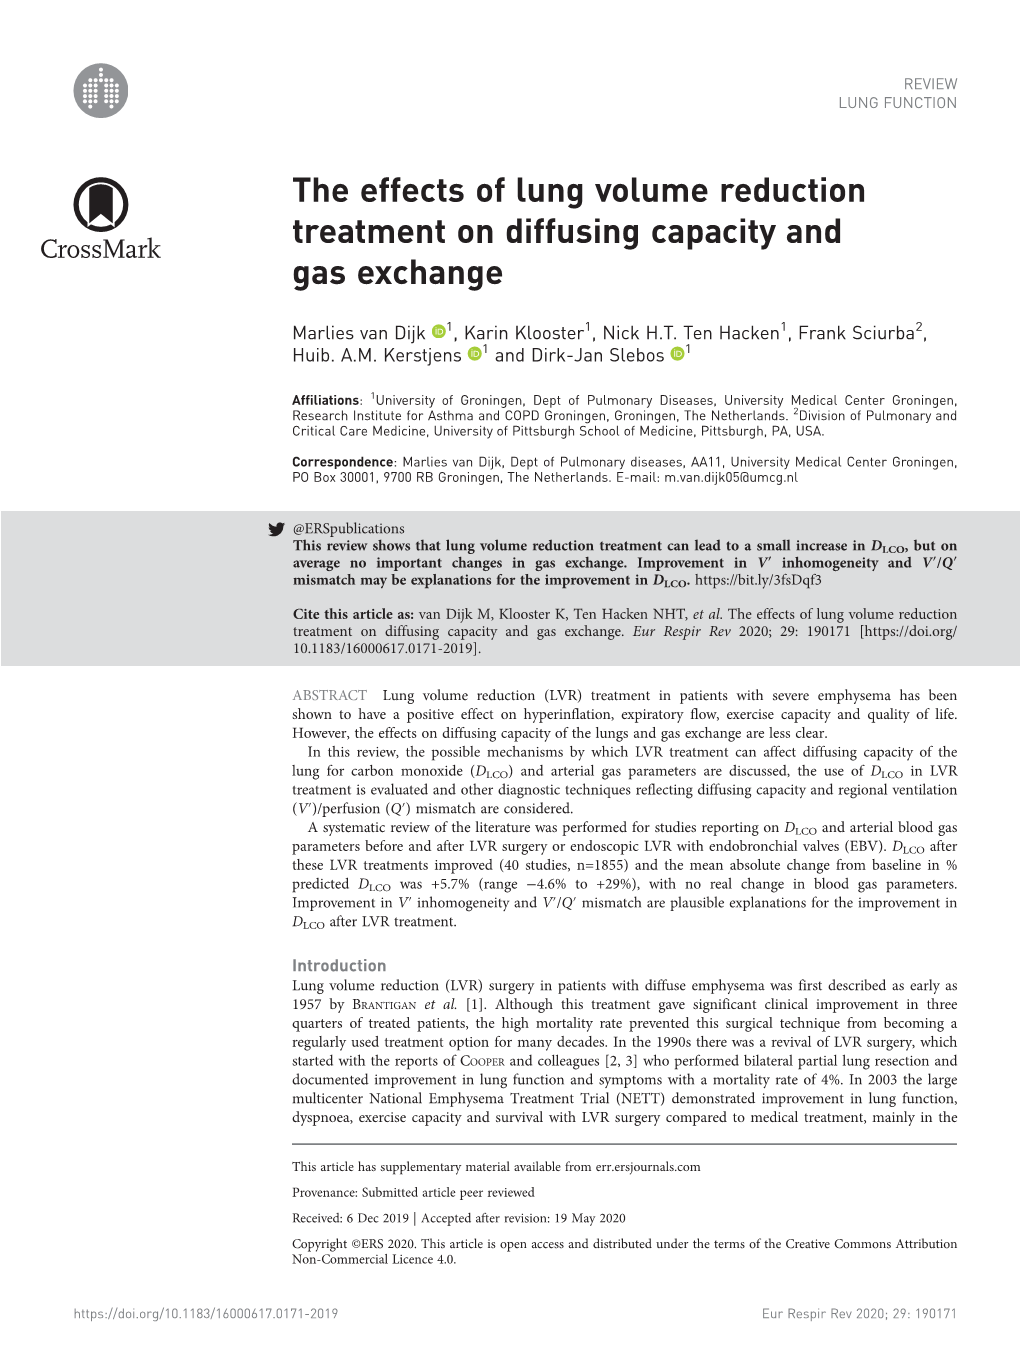 The Effects of Lung Volume Reduction Treatment on Diffusing Capacity and Gas'exchange